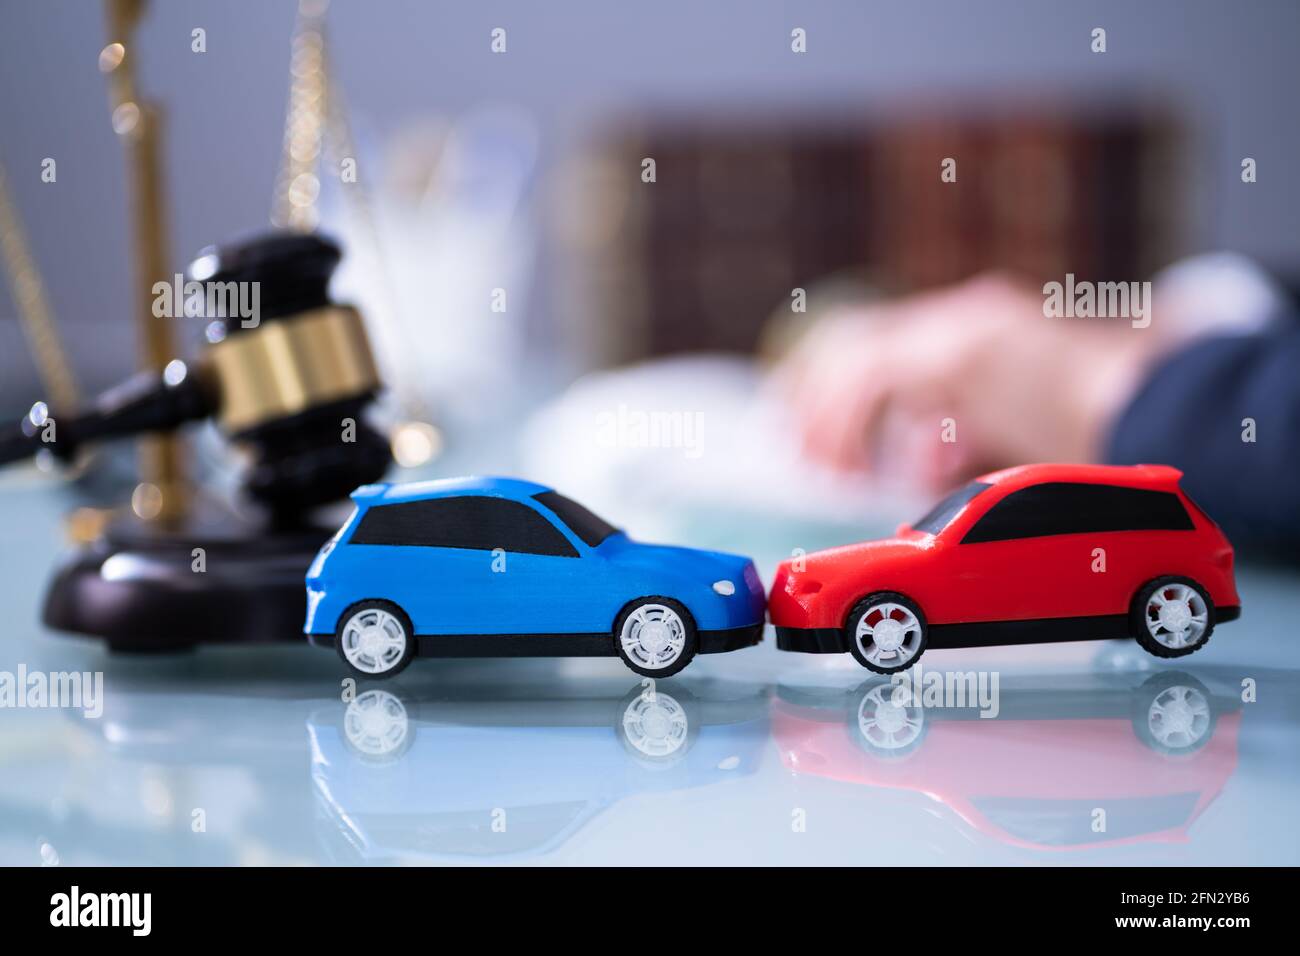 Car Accident Lawyer And Legal Liability Insurance Stock Photo